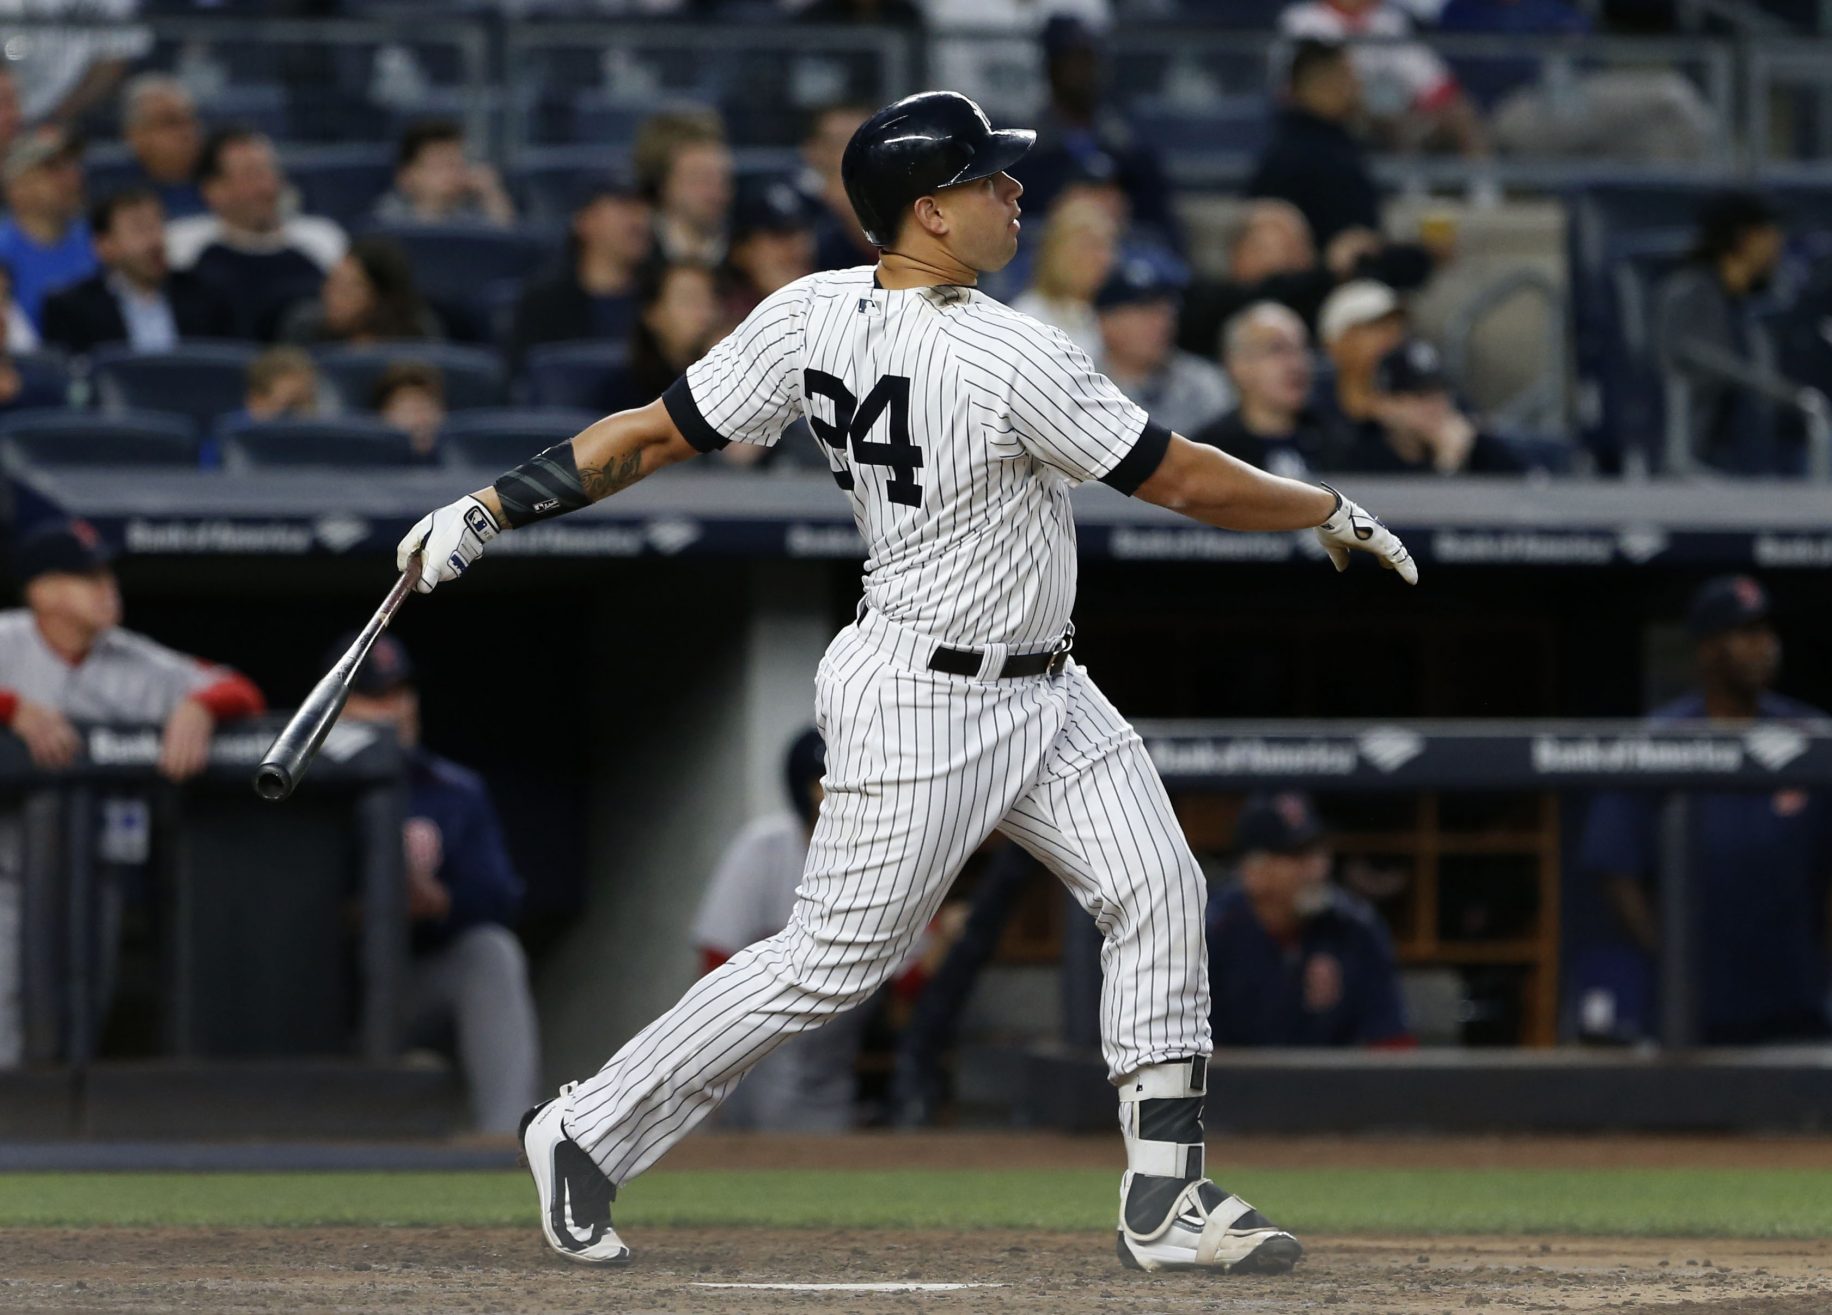 Gary Sanchez Homers Twice, Drives in Five Runs in New York Yankees Win 